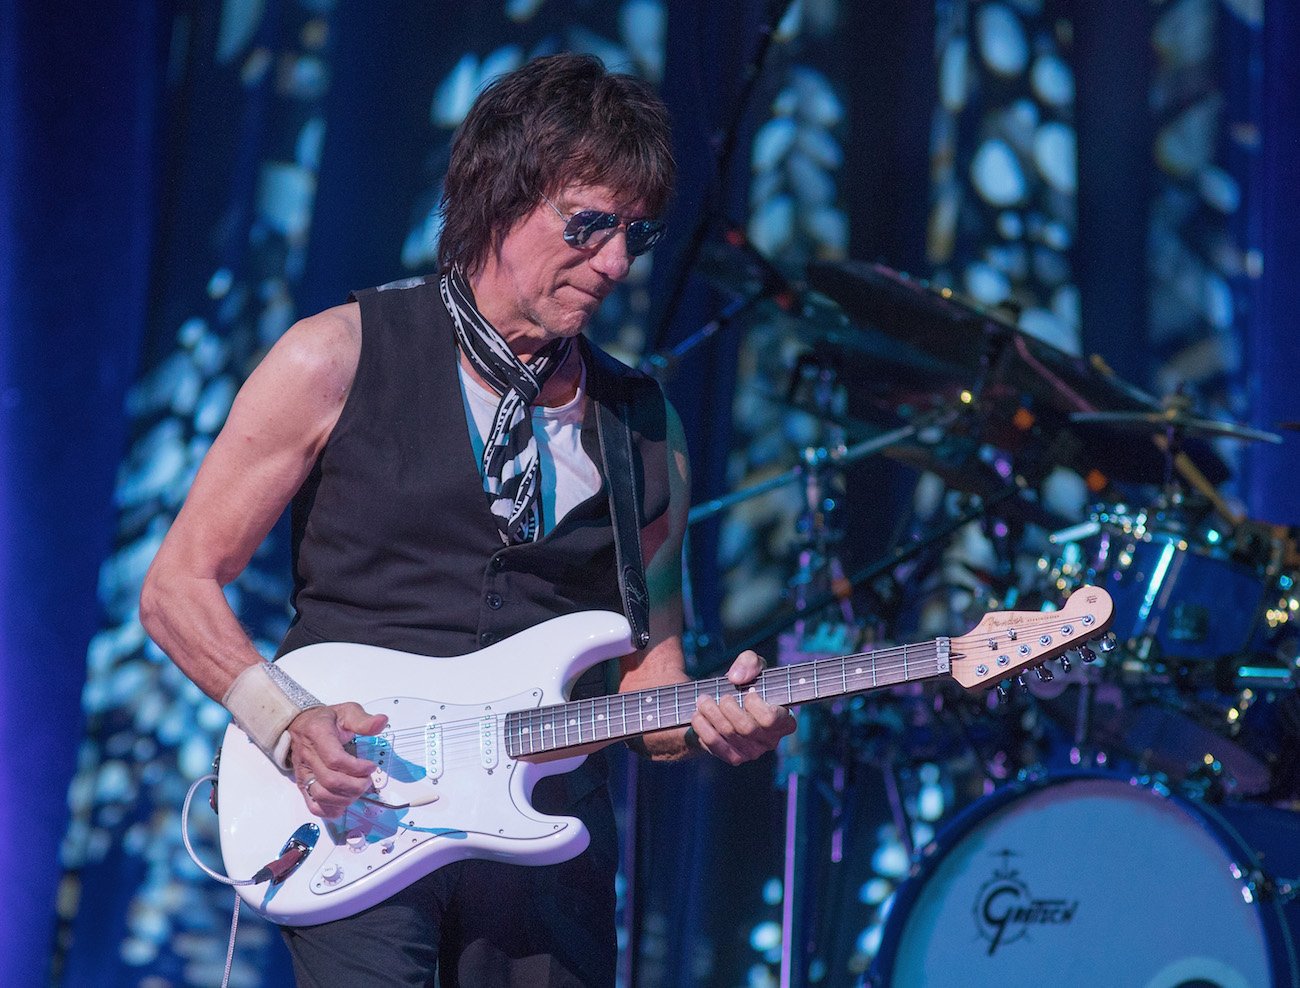 Jeff Beck performing at ACL Live in 2018 in Austin, Texas.